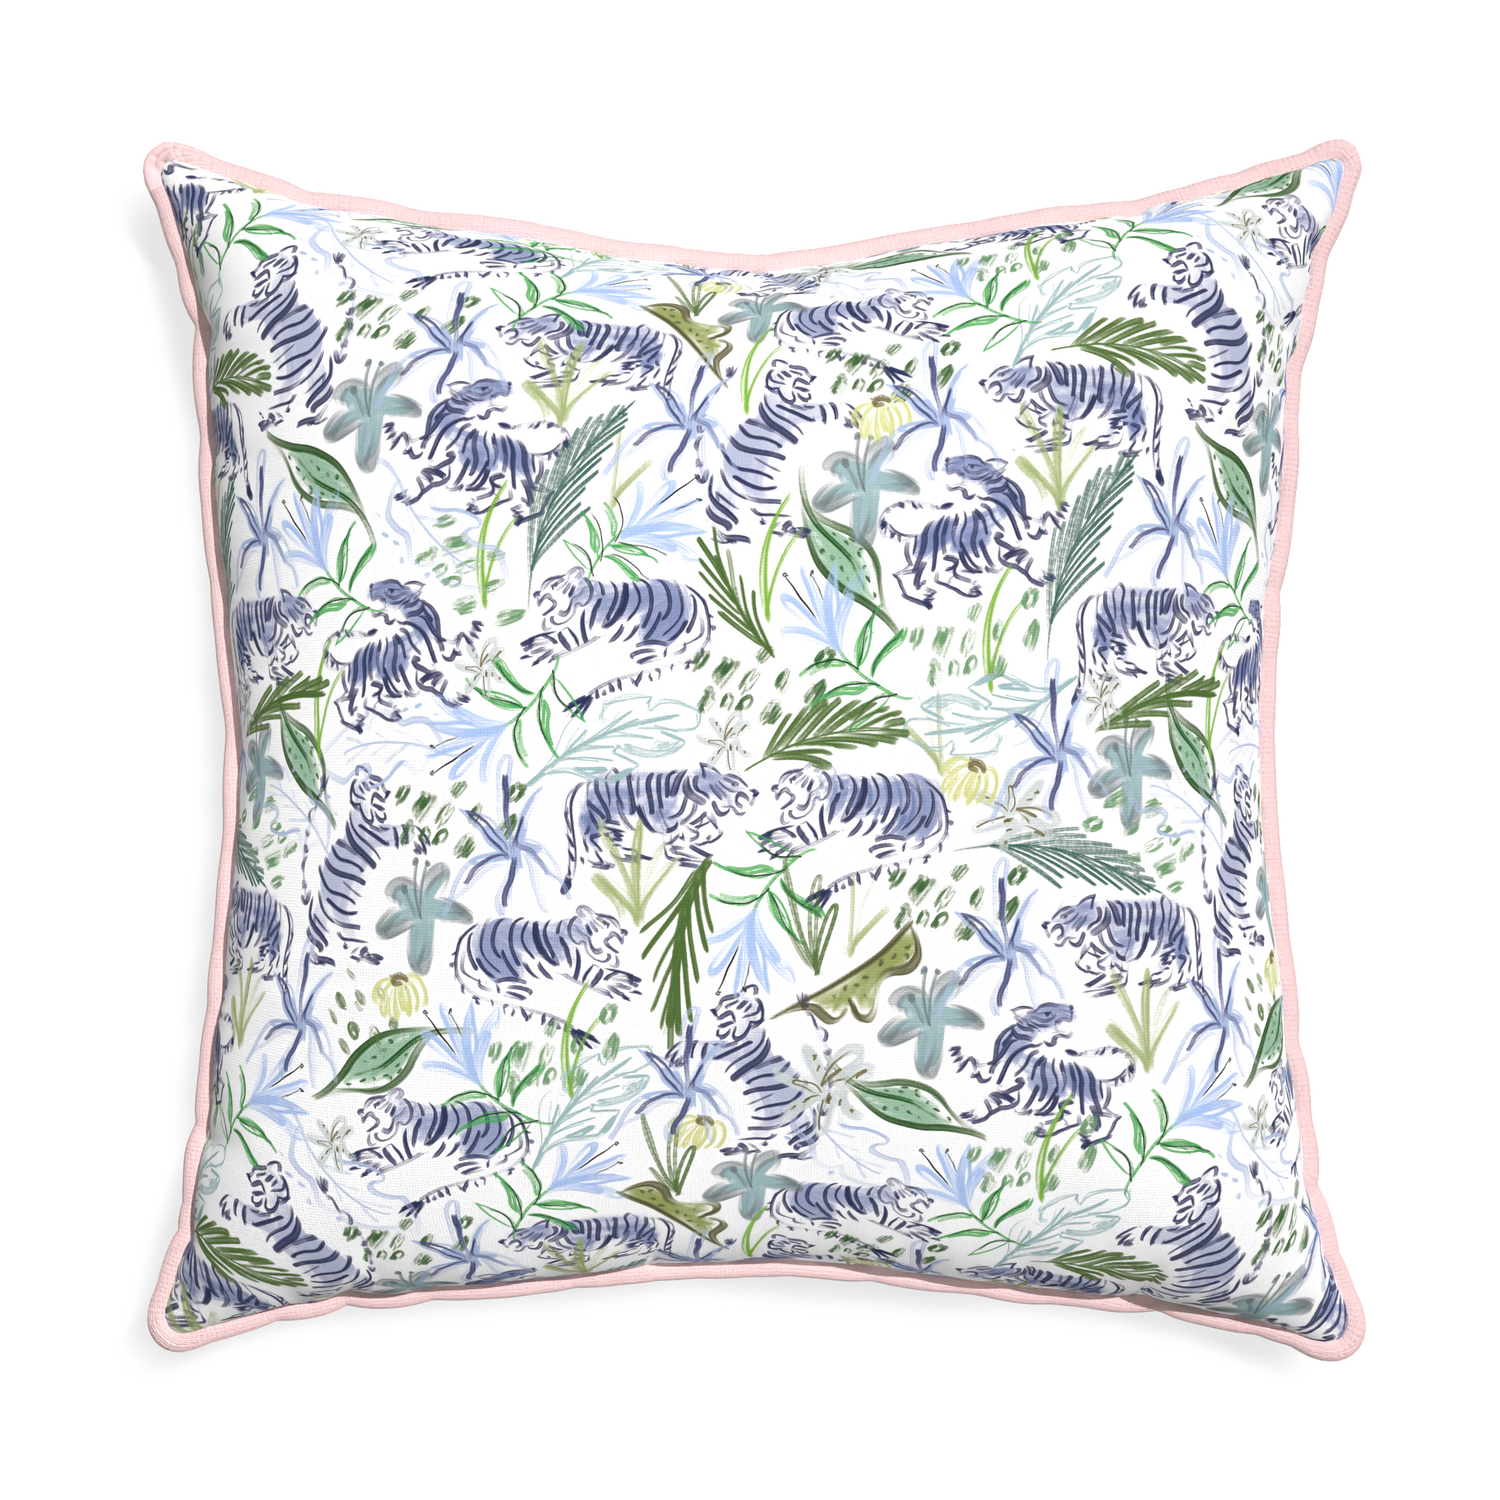 Euro-sham frida green custom pillow with petal piping on white background